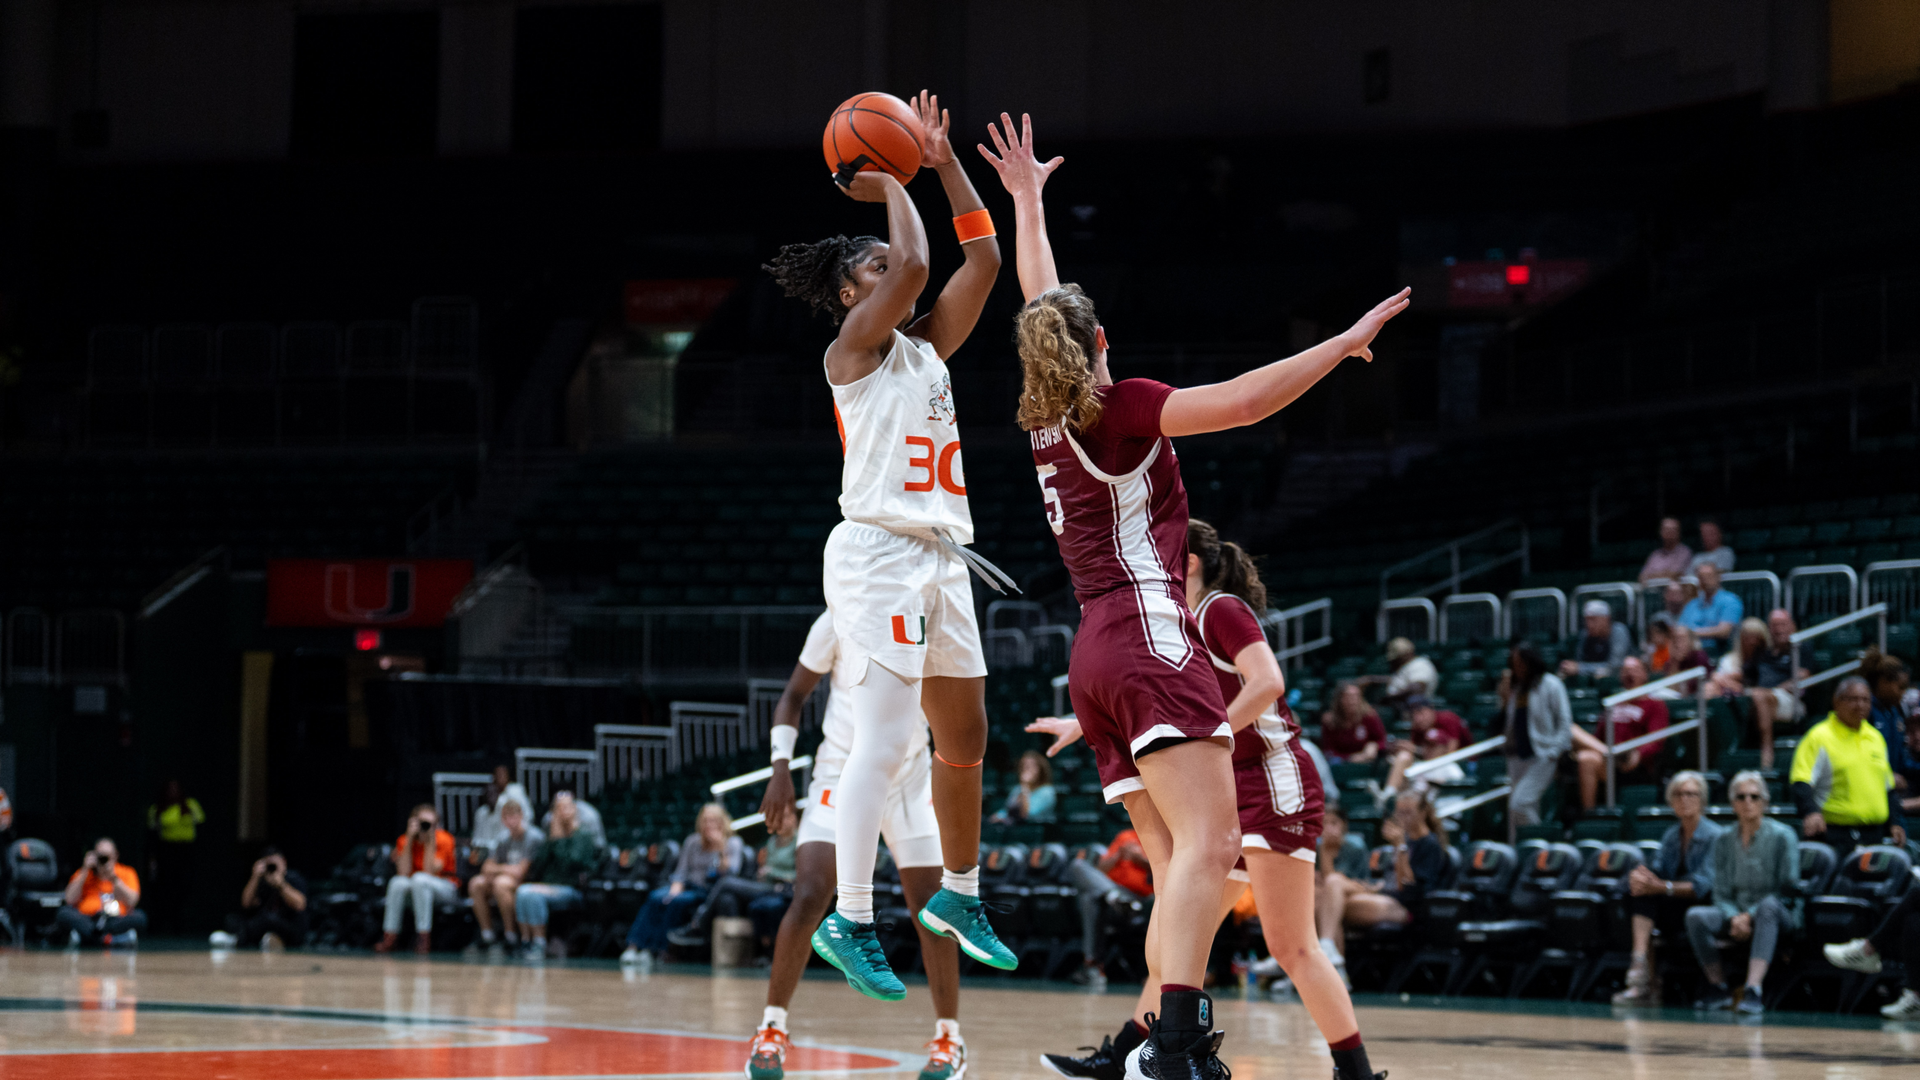 Canes Stifle Colgate With Persistent Pressure